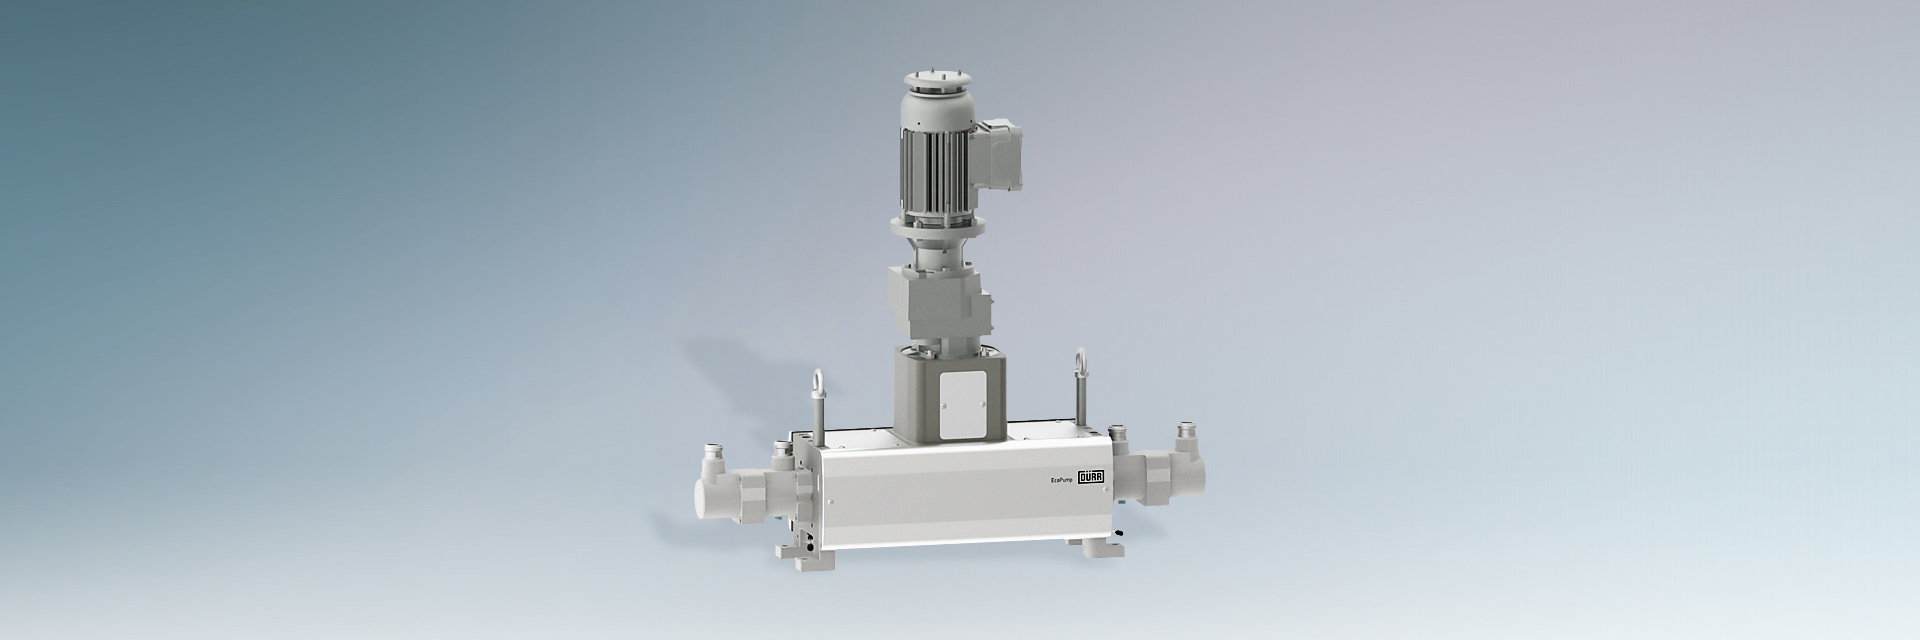 Electrical operated horizontal piston pump.